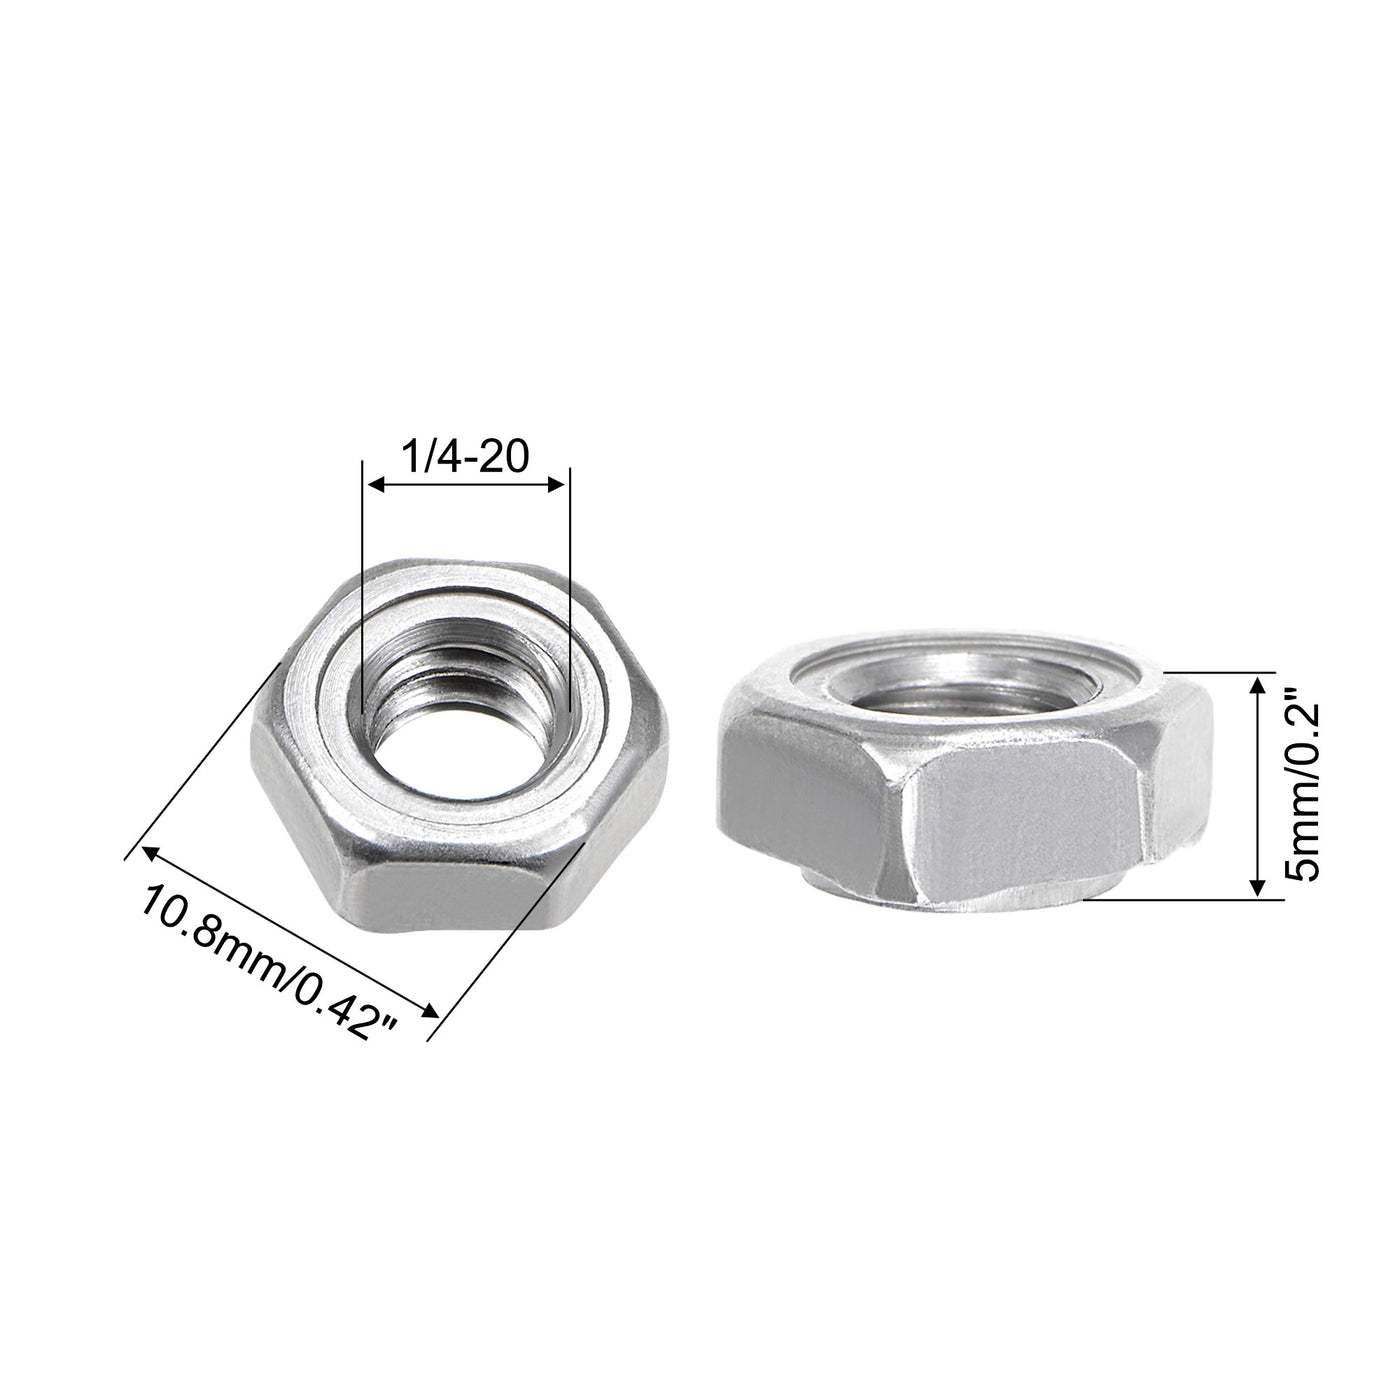 Uxcell Uxcell Hex Weld Nuts,1/2-13 Carbon Steel with 3 Projections Machine Screw Gray 10pcs